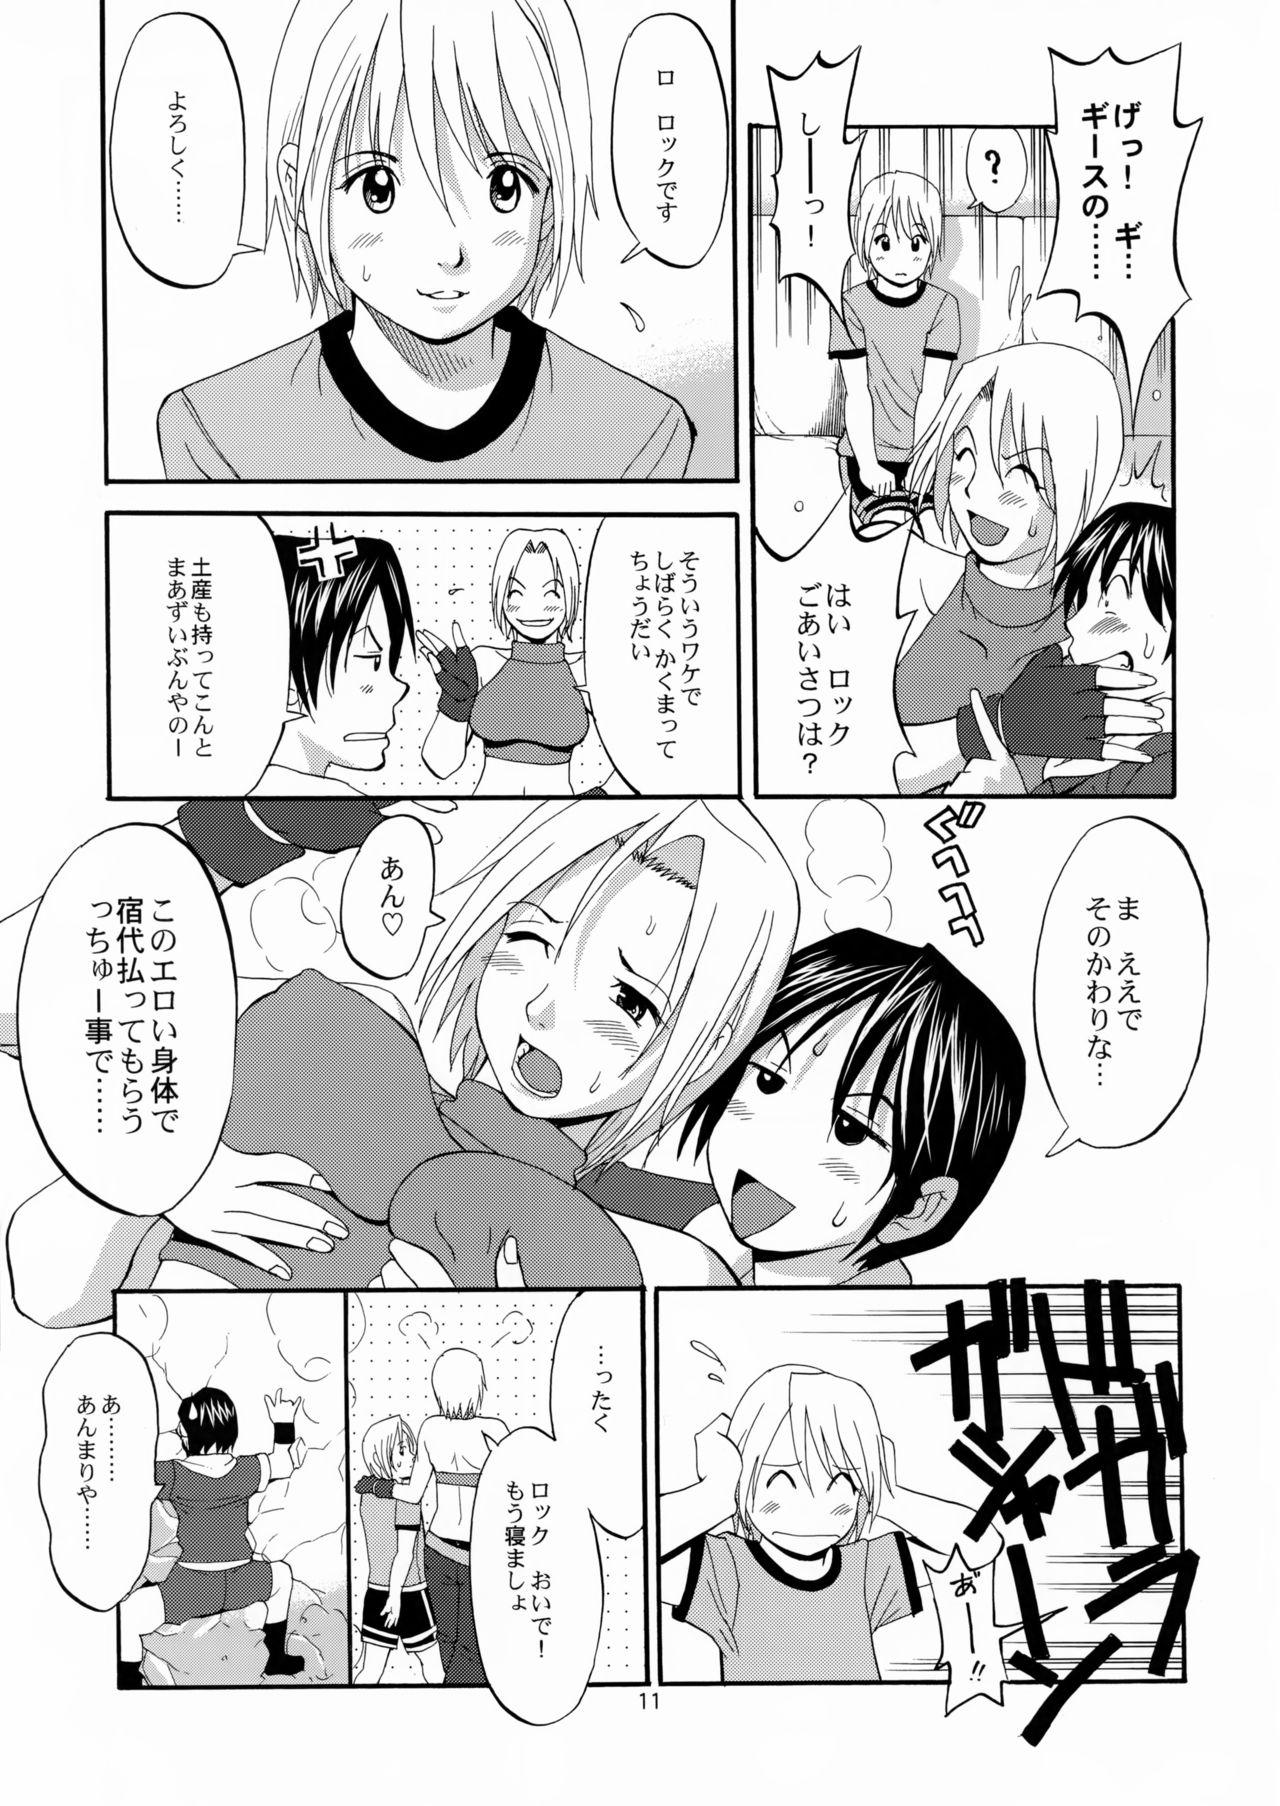 Safadinha The Yuri & Friends Mary Special - King of fighters Stepmom - Page 11